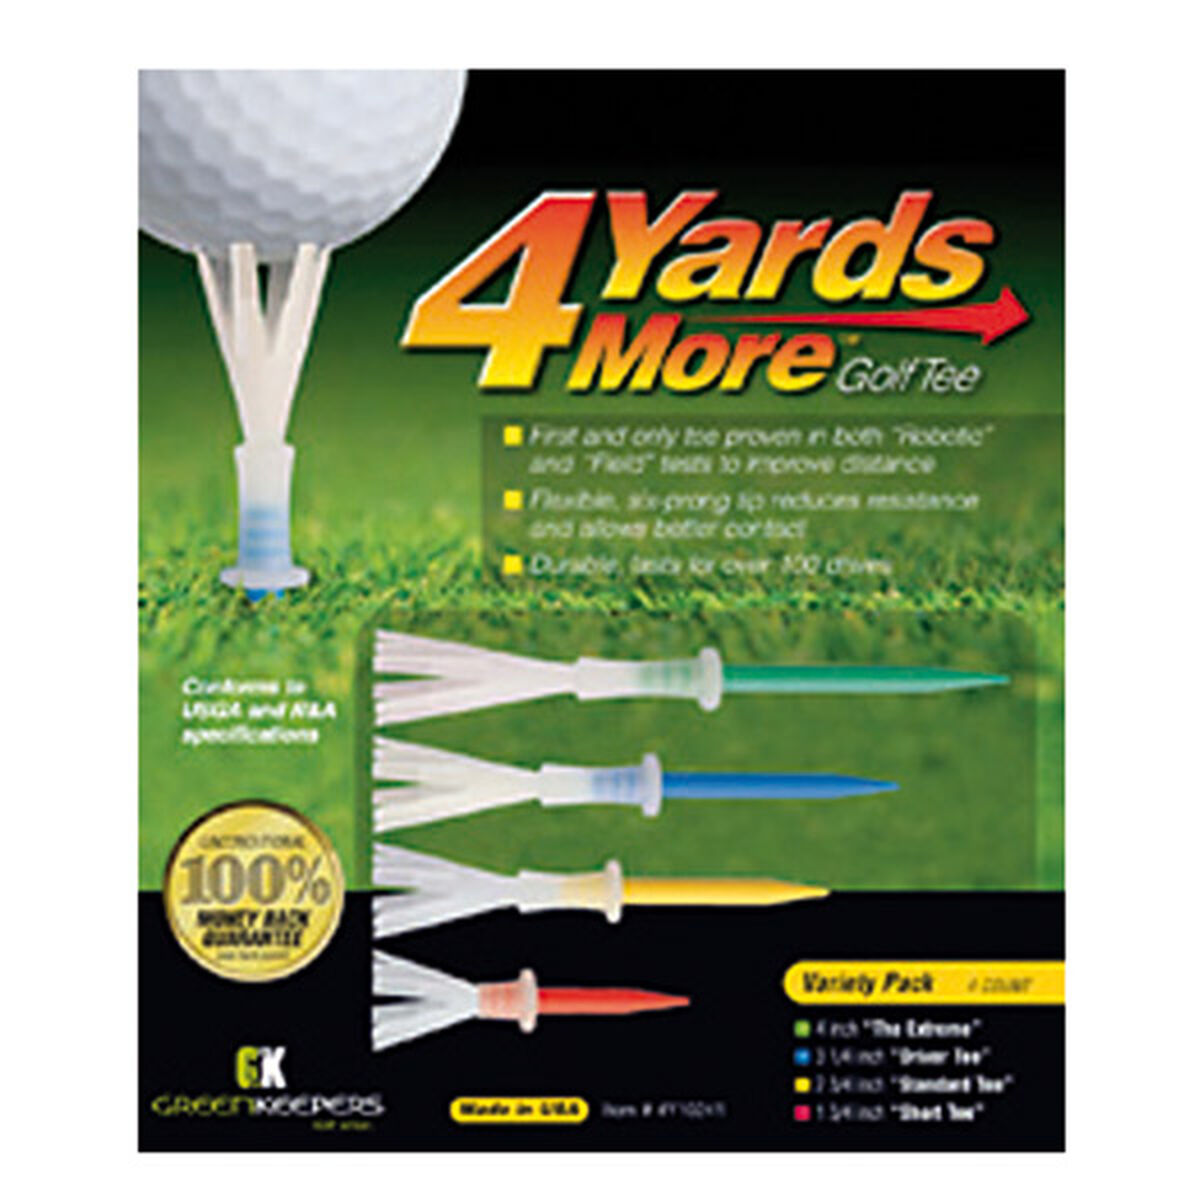 4 Yards More Tees, Variety Pack of 4 Golf, one size | American Golf